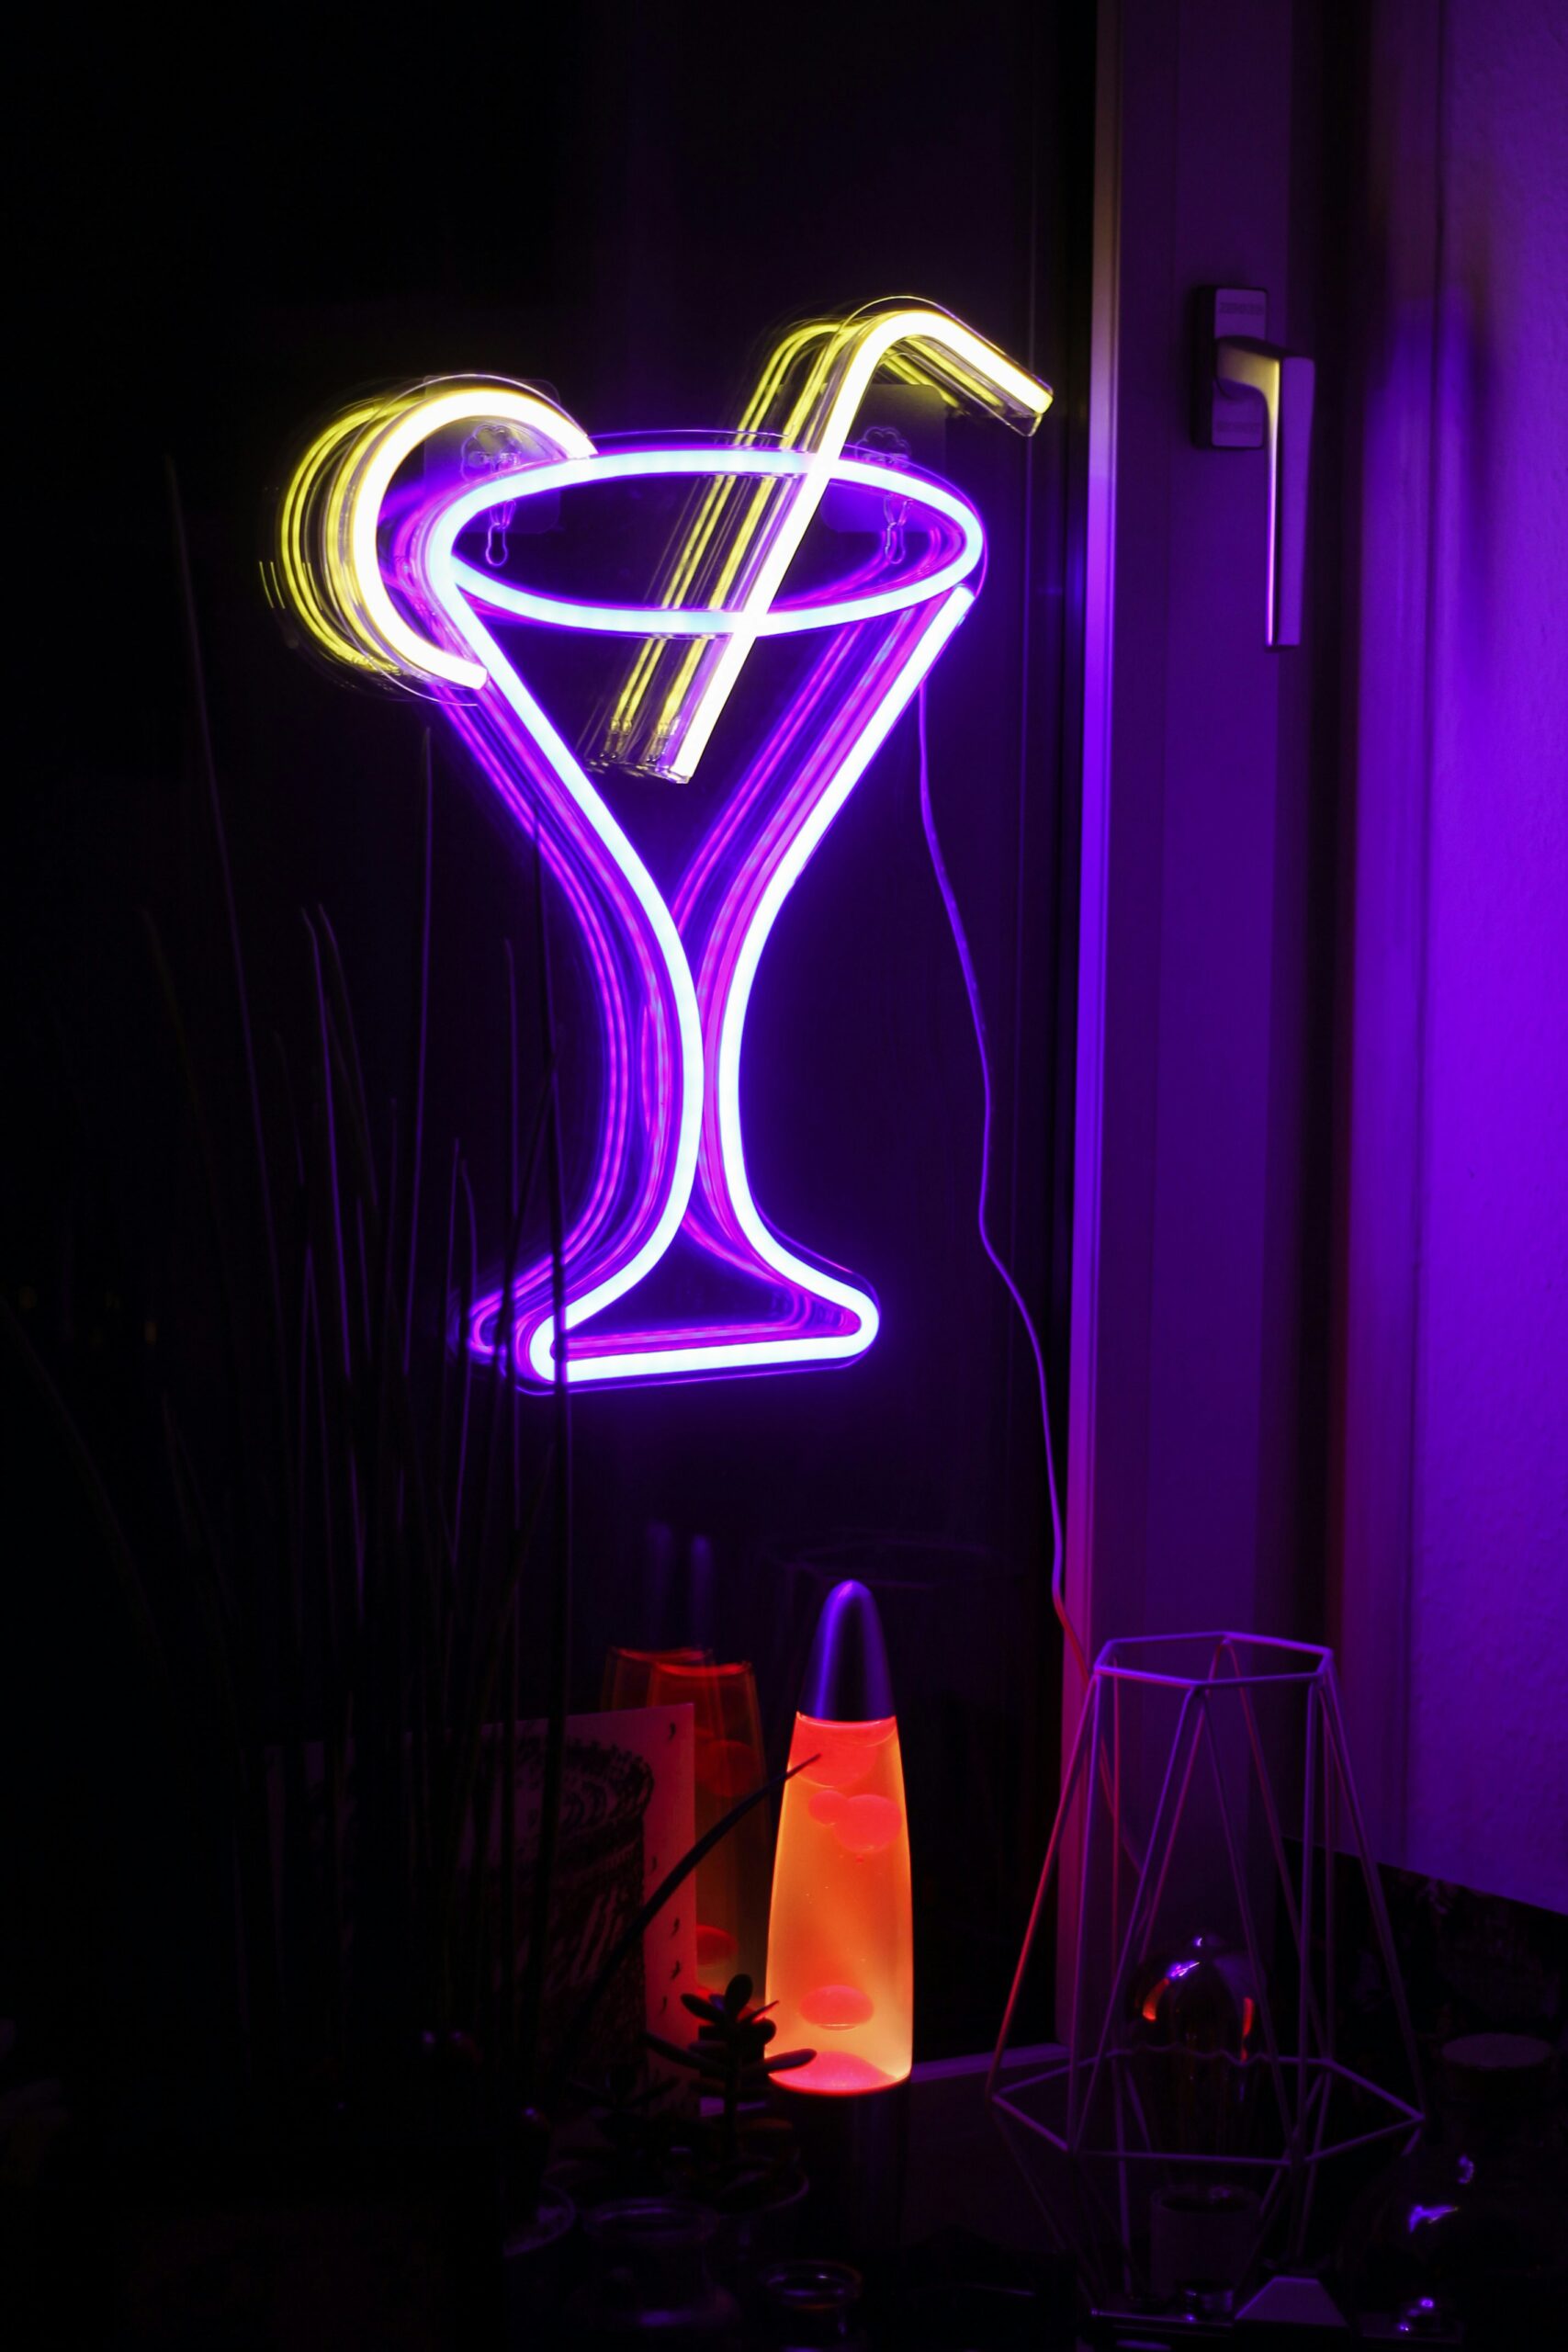 A neon sign and lava lamp